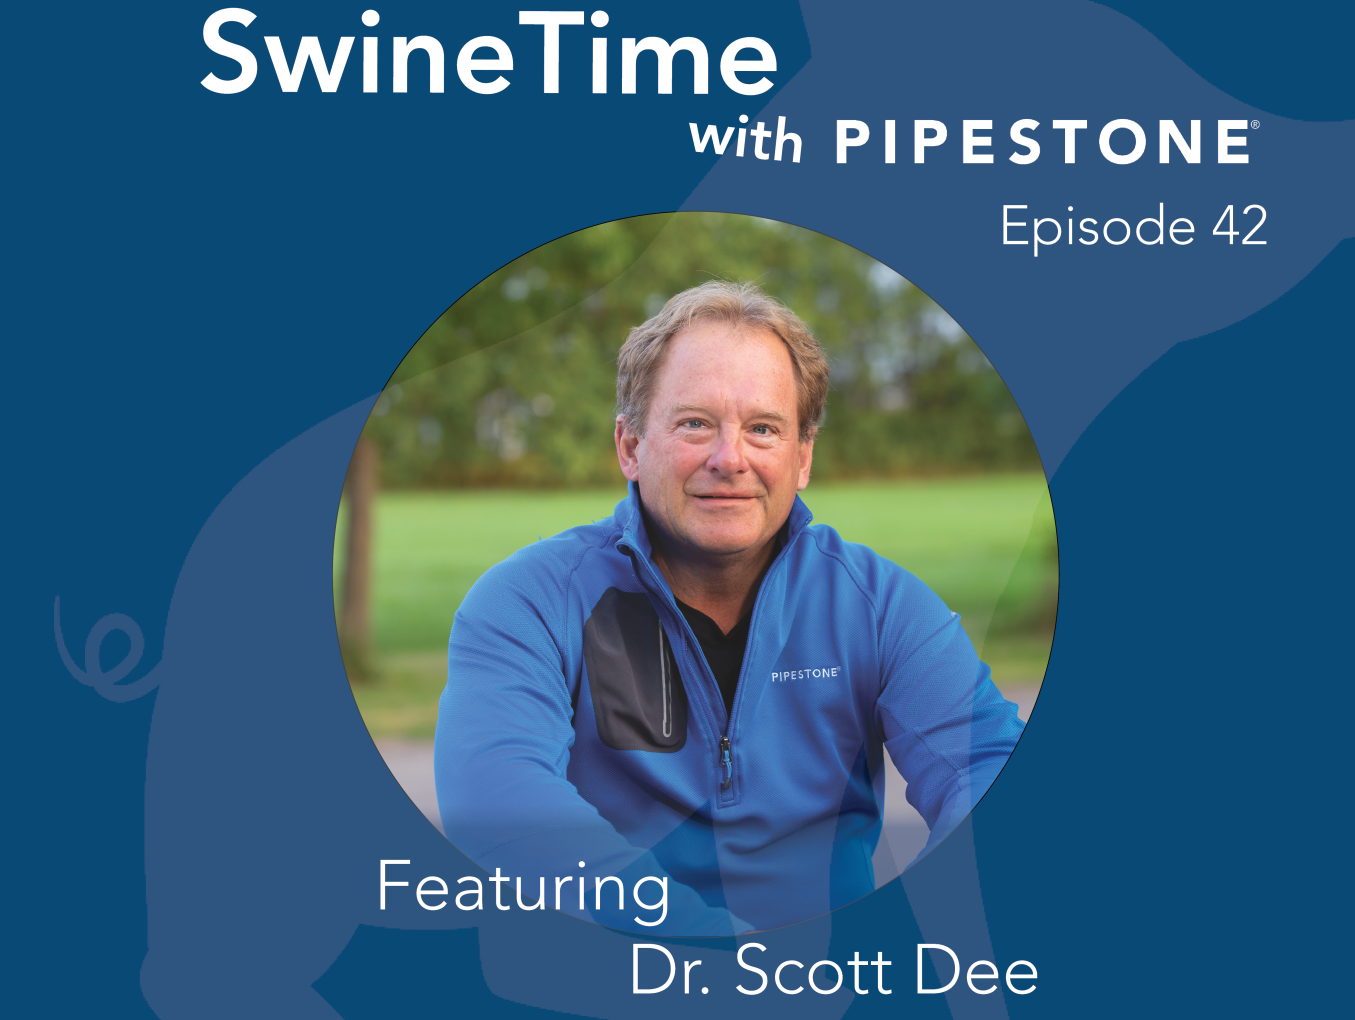 Episode 42: Feed Risk with Dr. Scott Dee